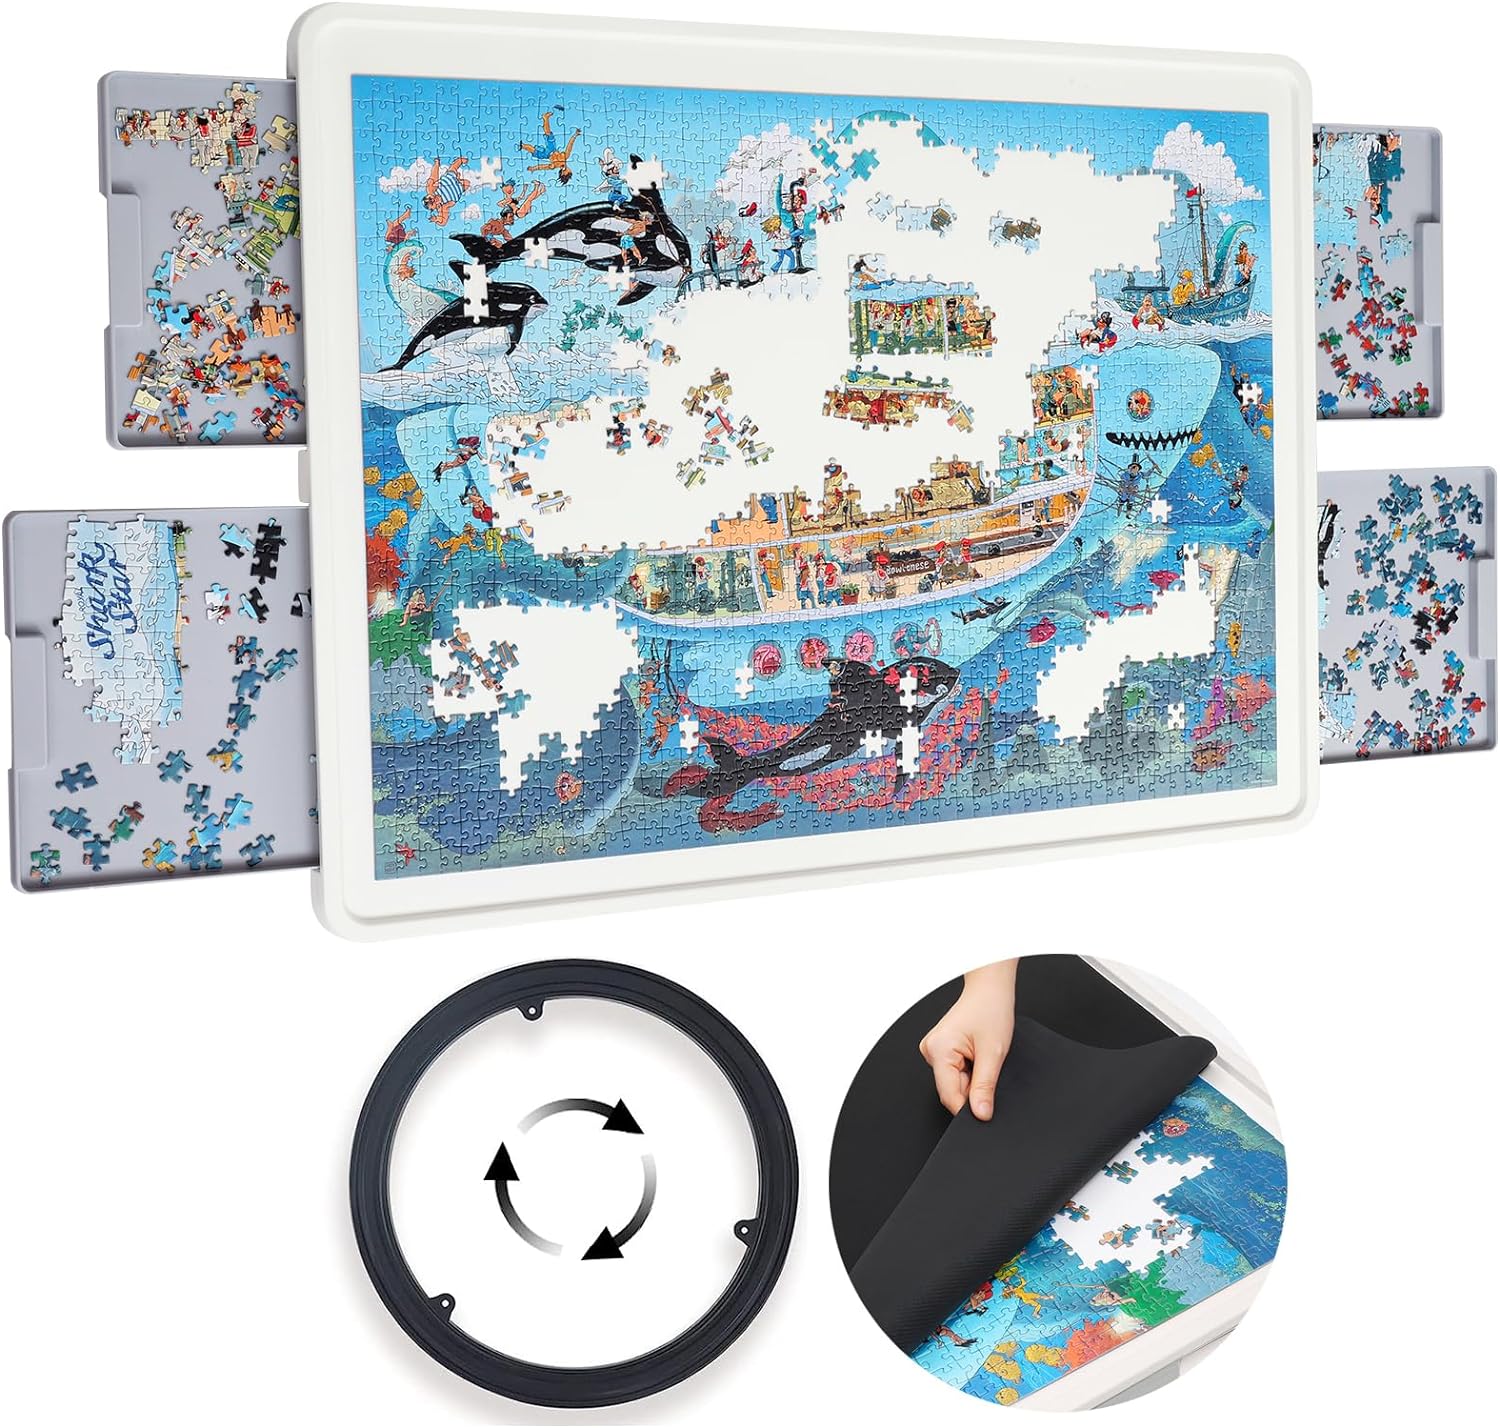 💥Rotating Plastic Puzzle Board with Drawers and Cover - Limited time deal